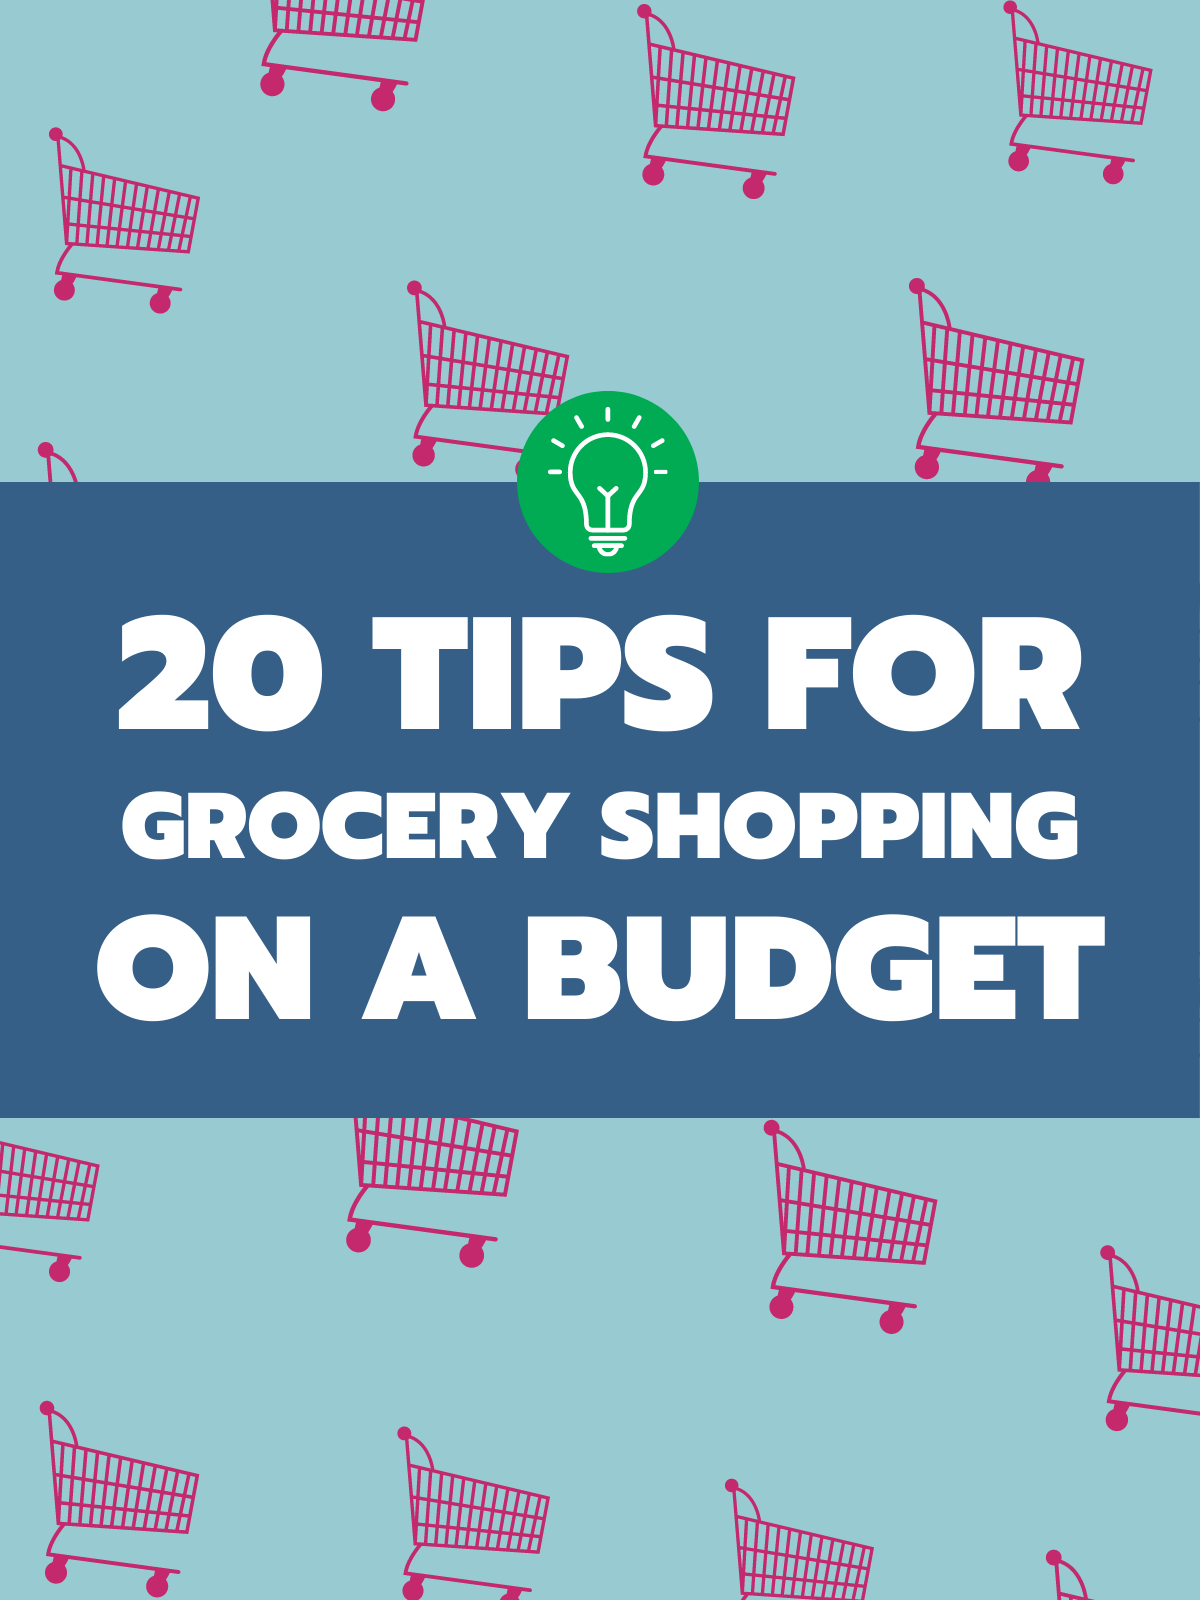 20 Tips for Shopping on a Budget text on a pale blue background with pink shopping carts and blue box for text